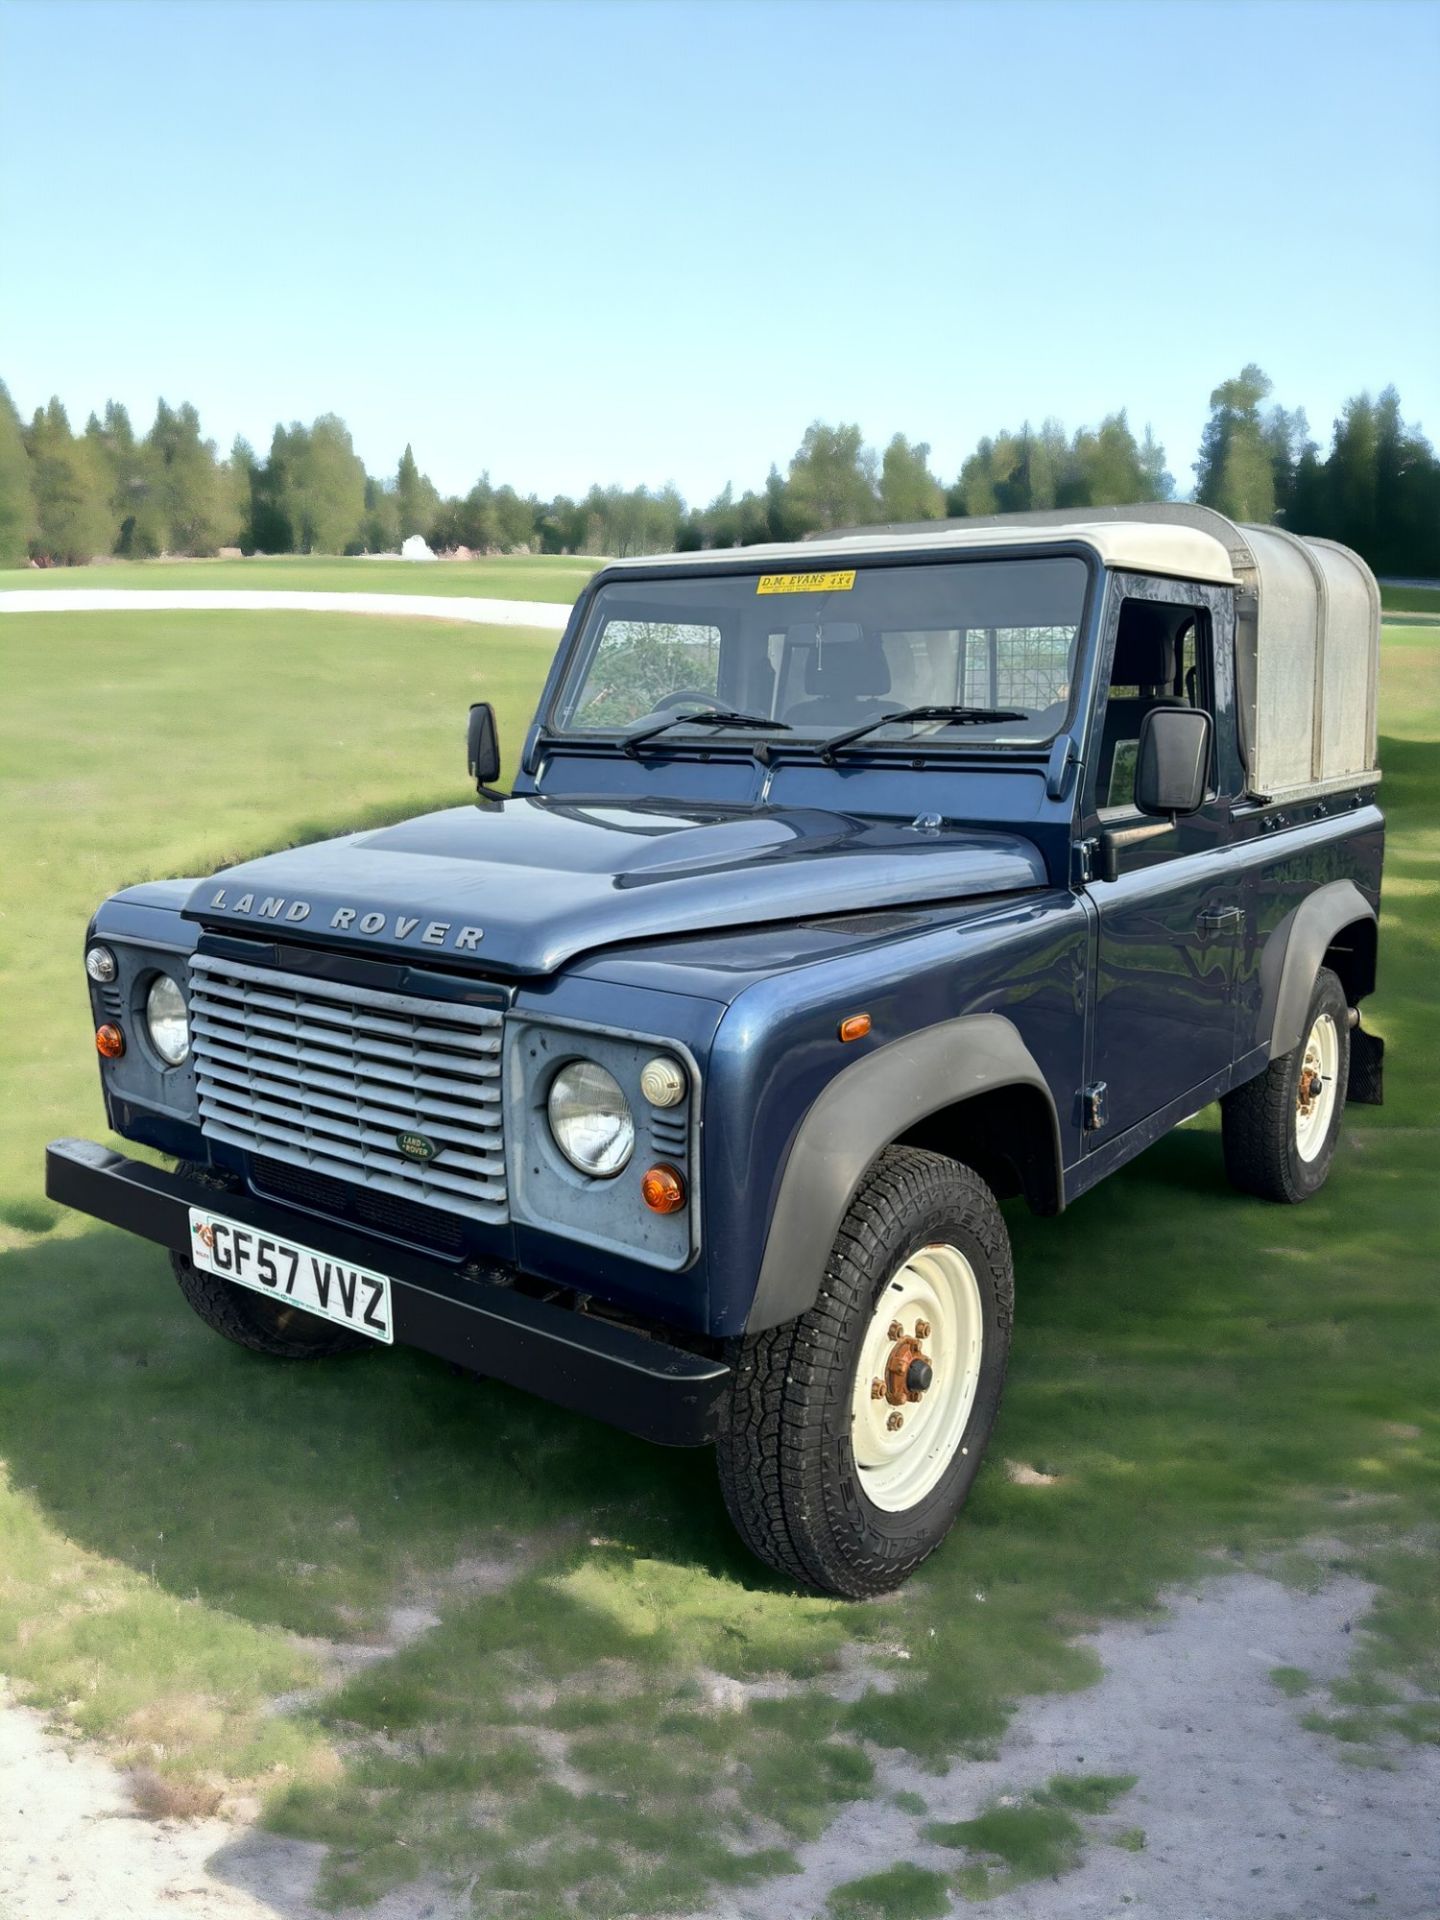 UNLEASH YOUR ADVENTUROUS SPIRIT WITH THE 2008 LAND ROVER DEFENDER 90 TRUCK TDCI - Image 4 of 15